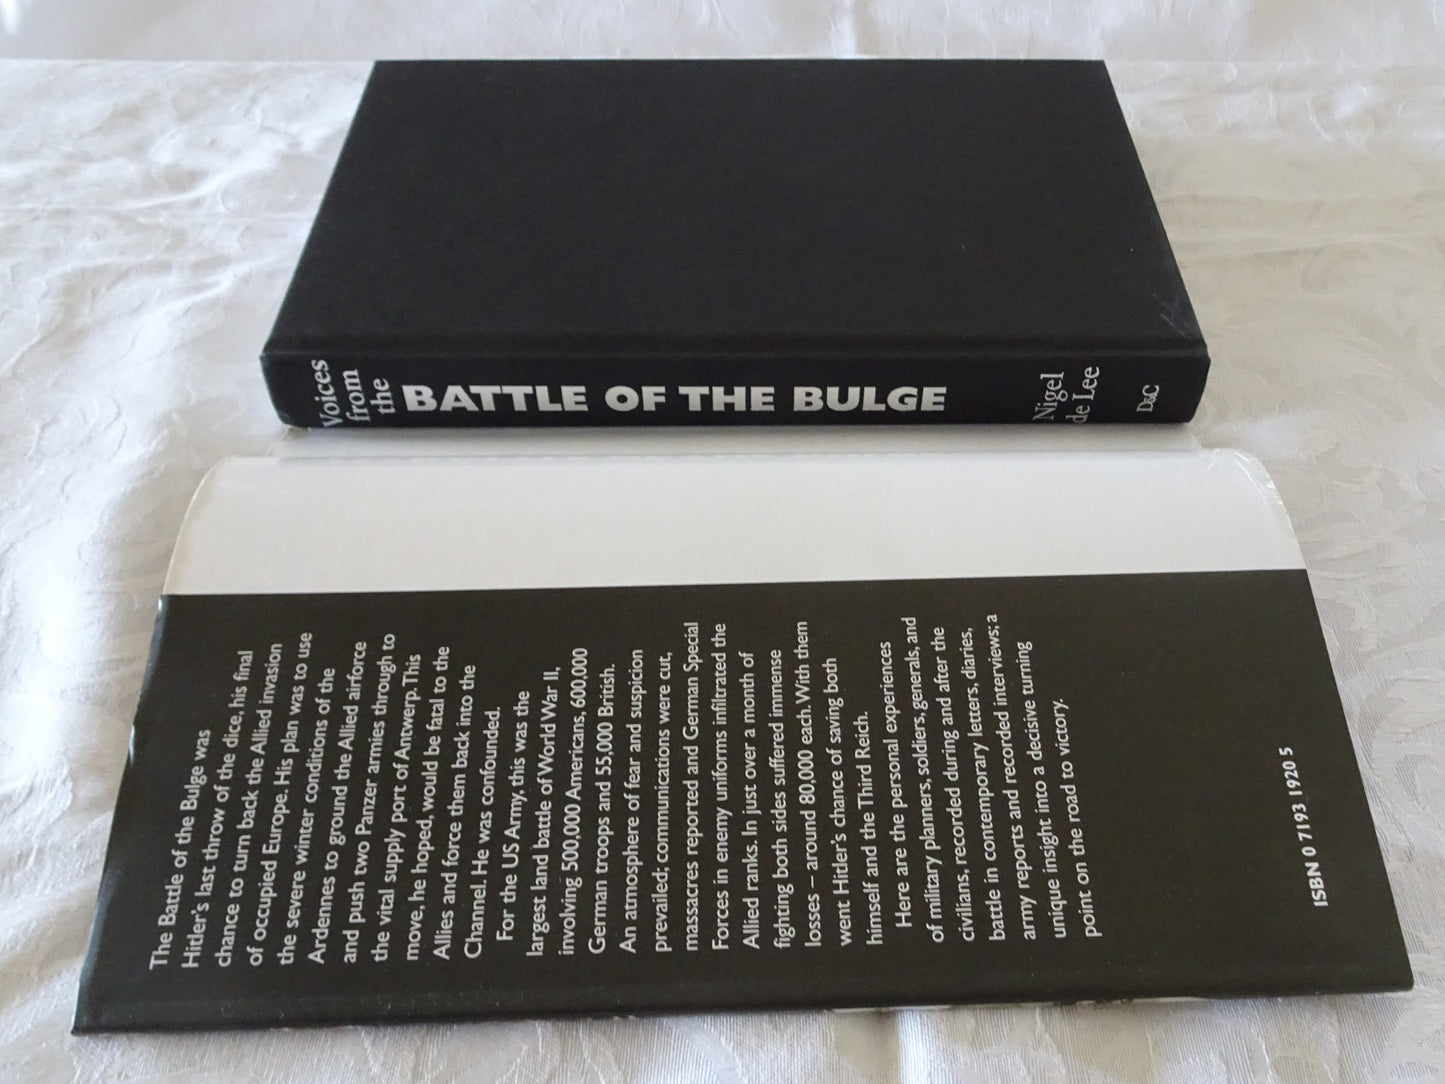 Voices from the Battle of The Bulge by Nigel de Lee